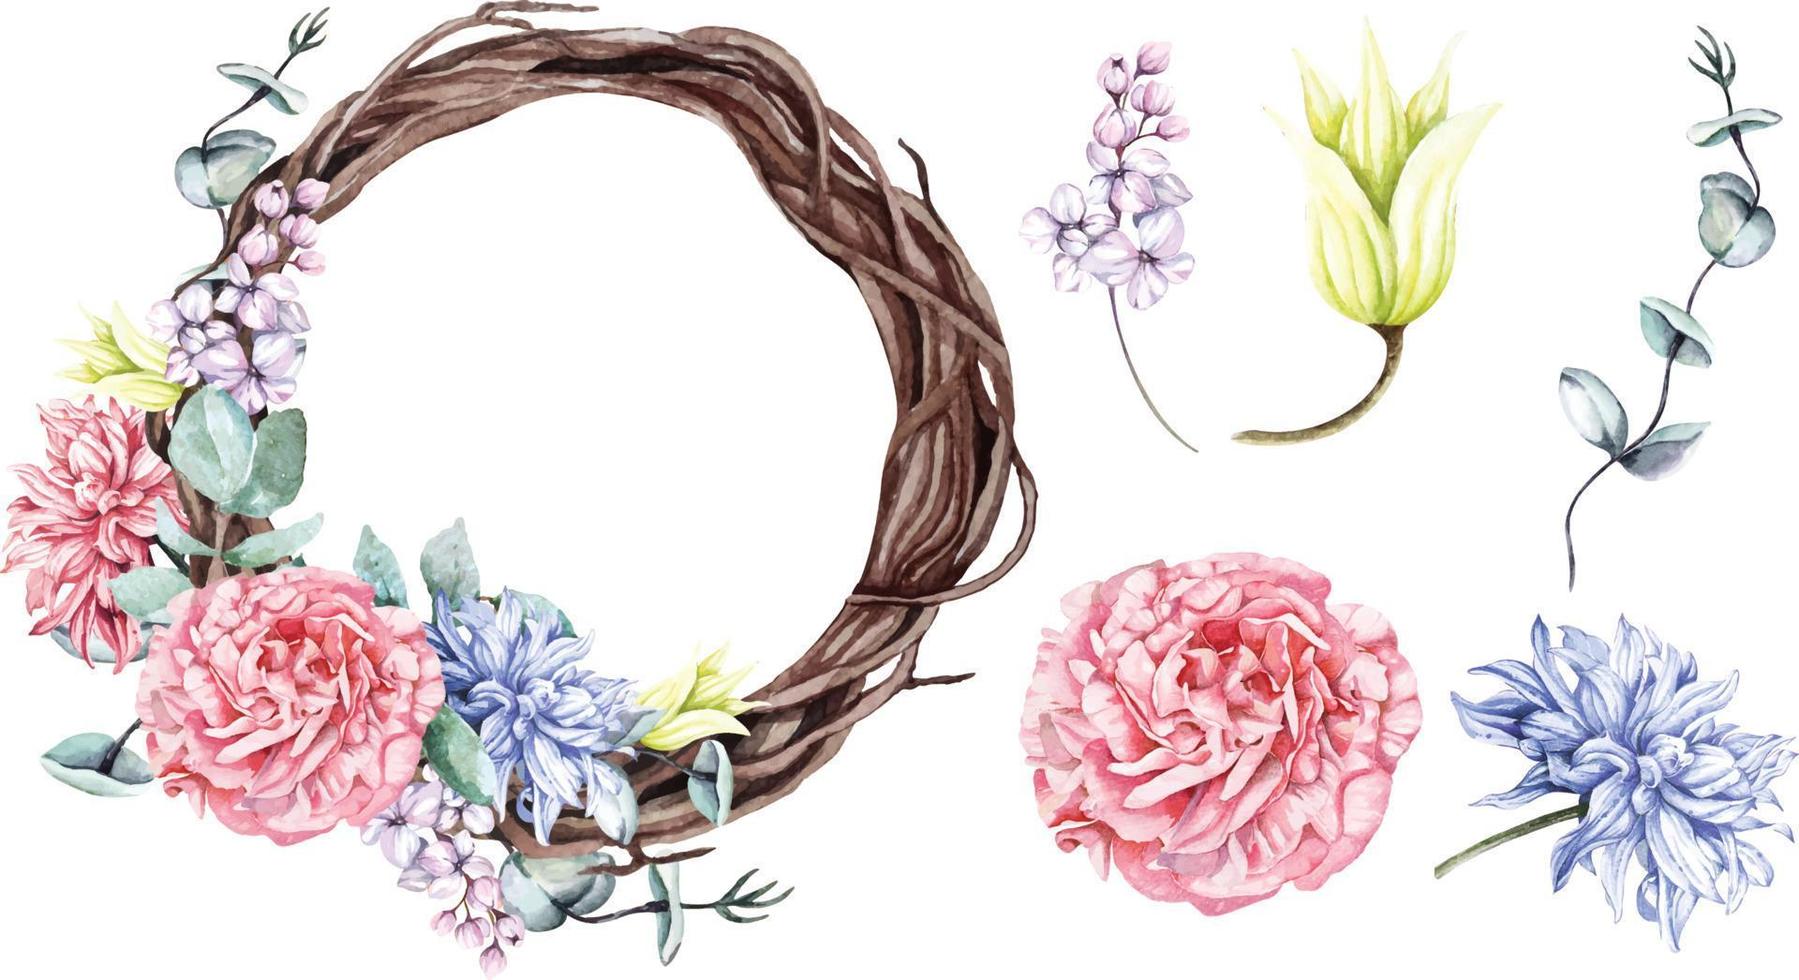 Flowers and vines wreath painted in watercolor.Flora for invitation, wedding or greeting cards. vector